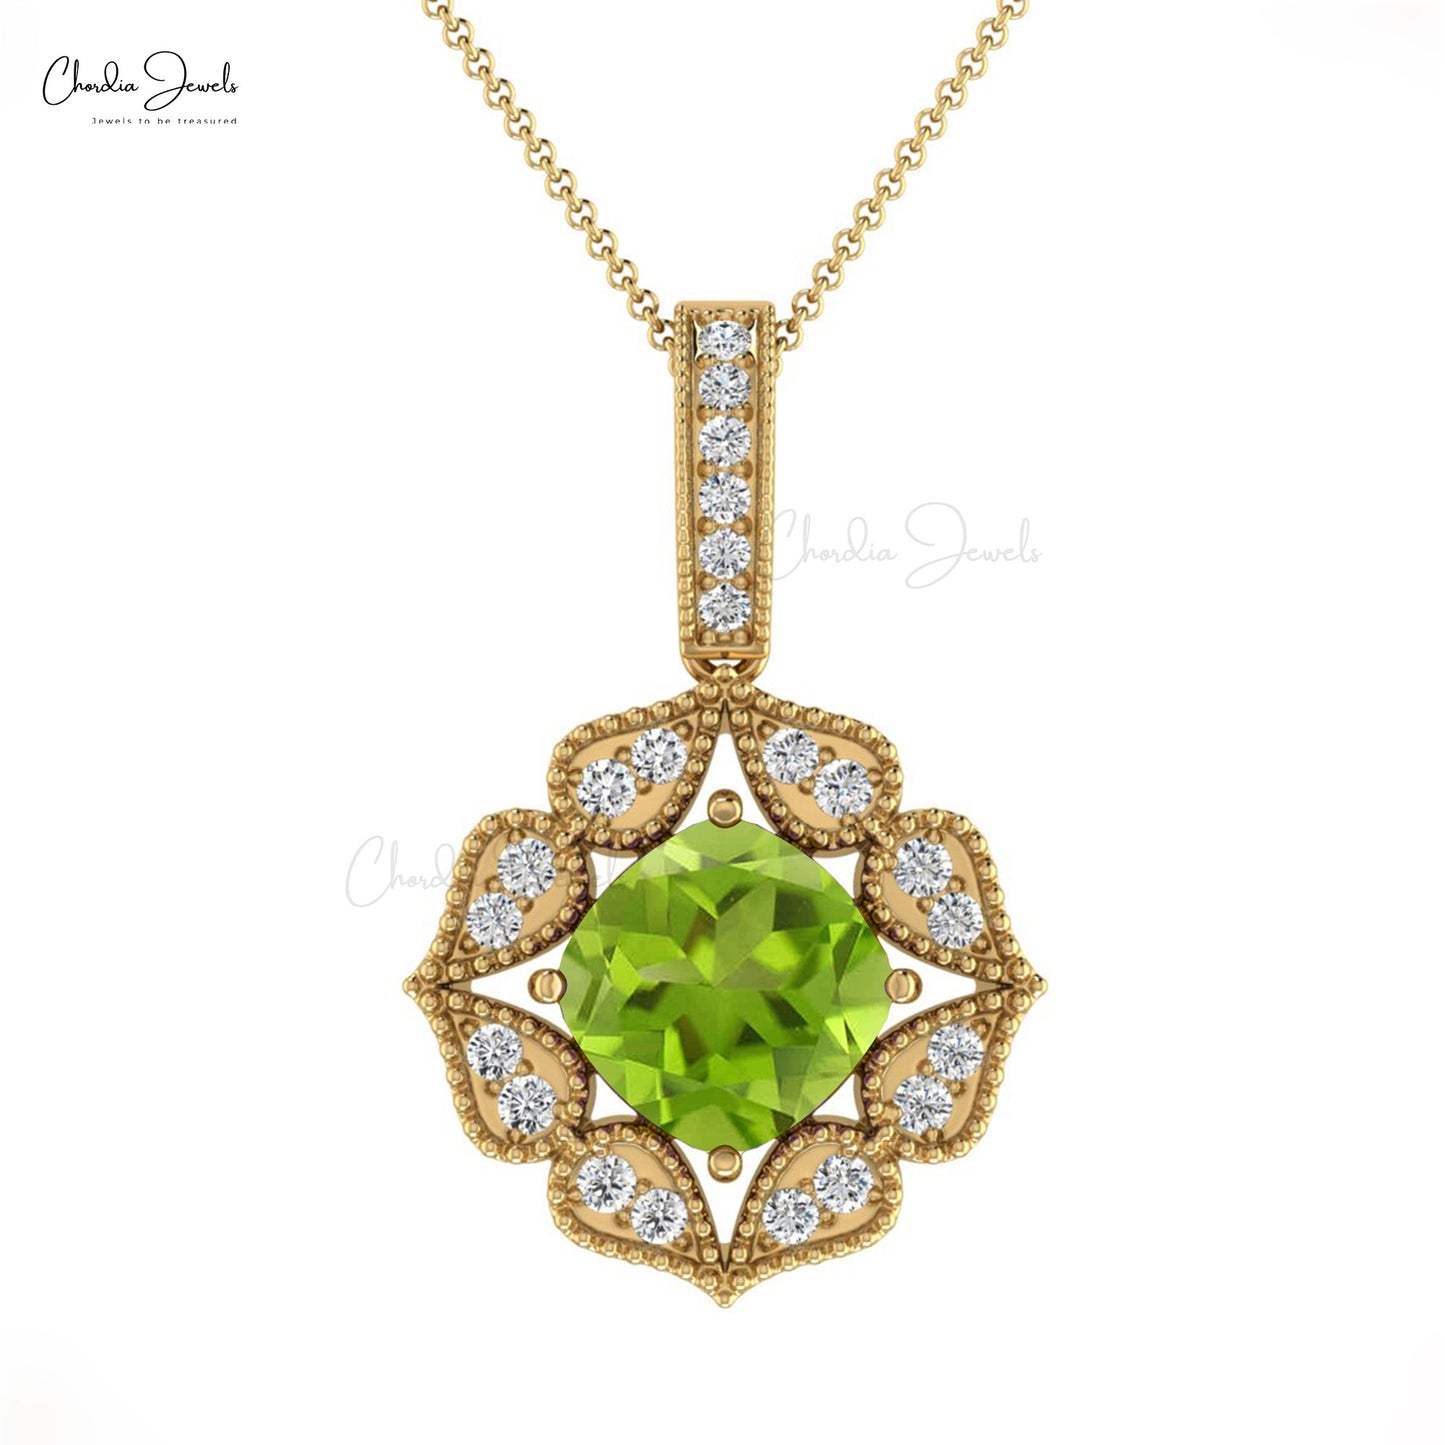 Load image into Gallery viewer, Newly Designer Natural Green Peridot Pendant Necklace Round Shape Genuine White Diamond Art Deco Pendant Necklace in 14k Pure Gold Gift For Her
